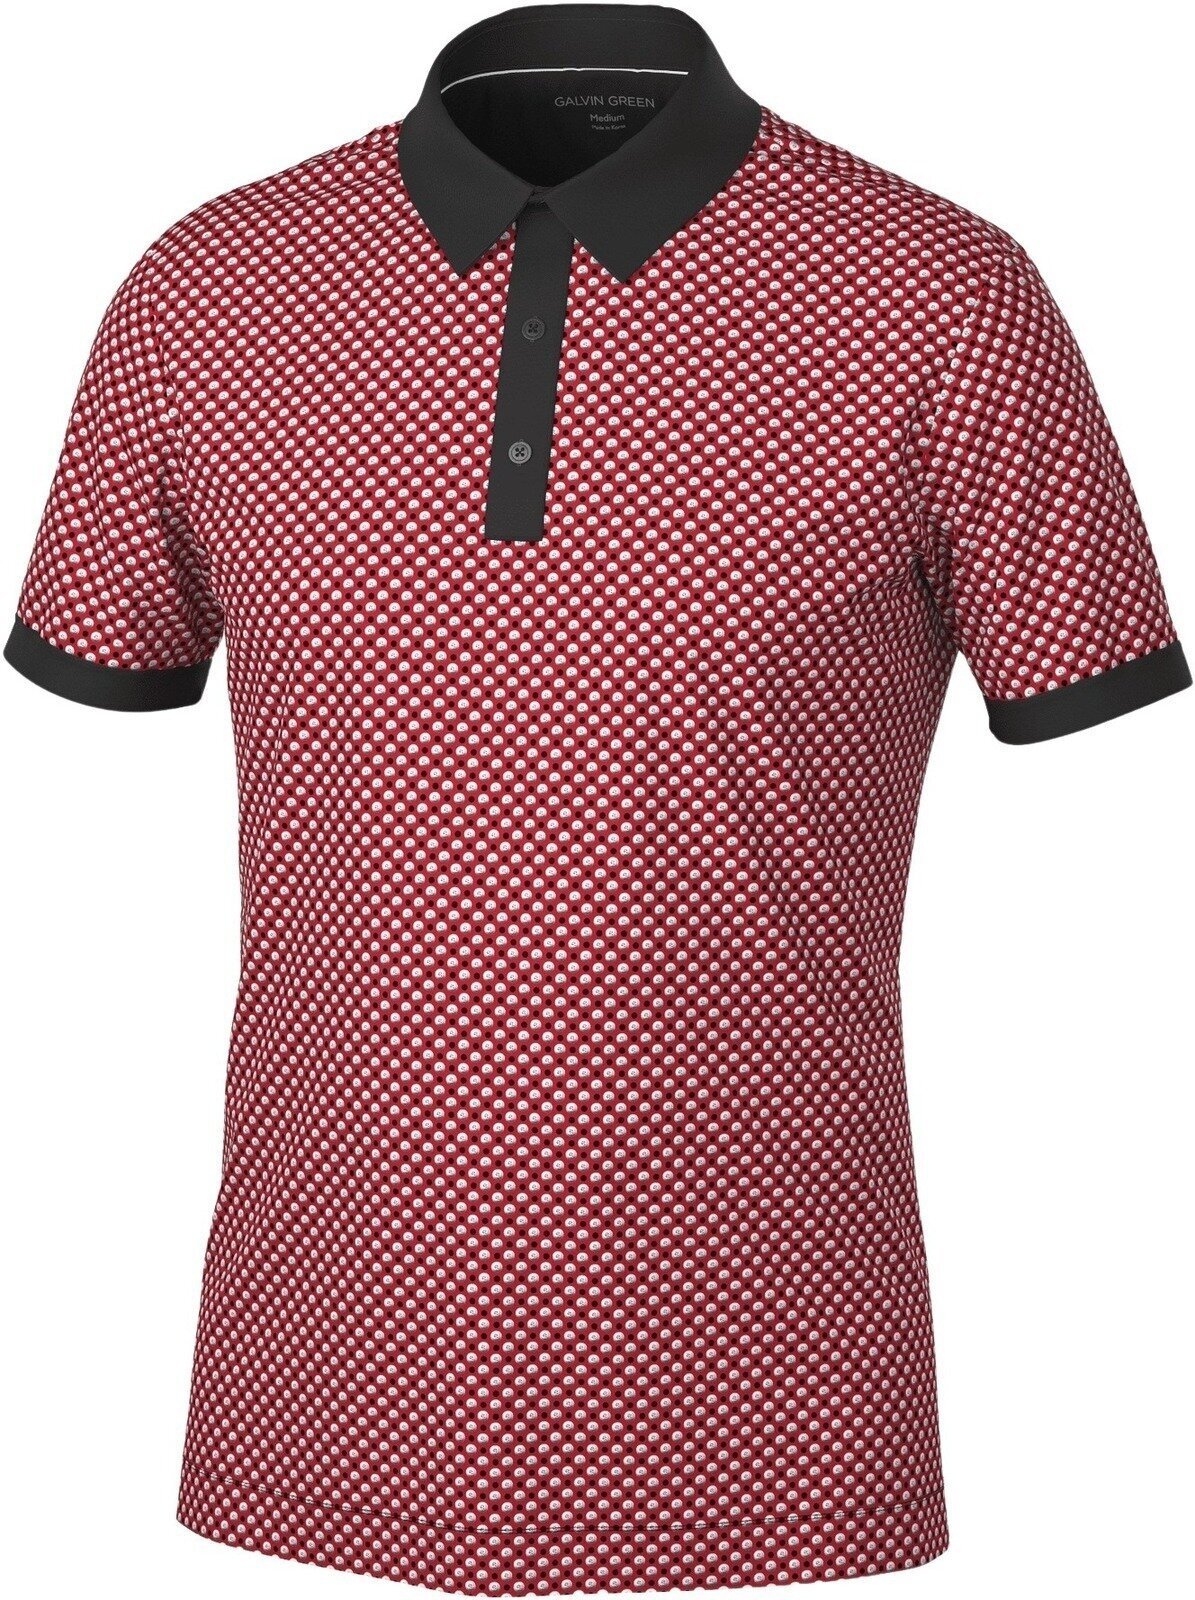 Chemise polo Galvin Green Mate Mens Polo Shirt Red/Black S